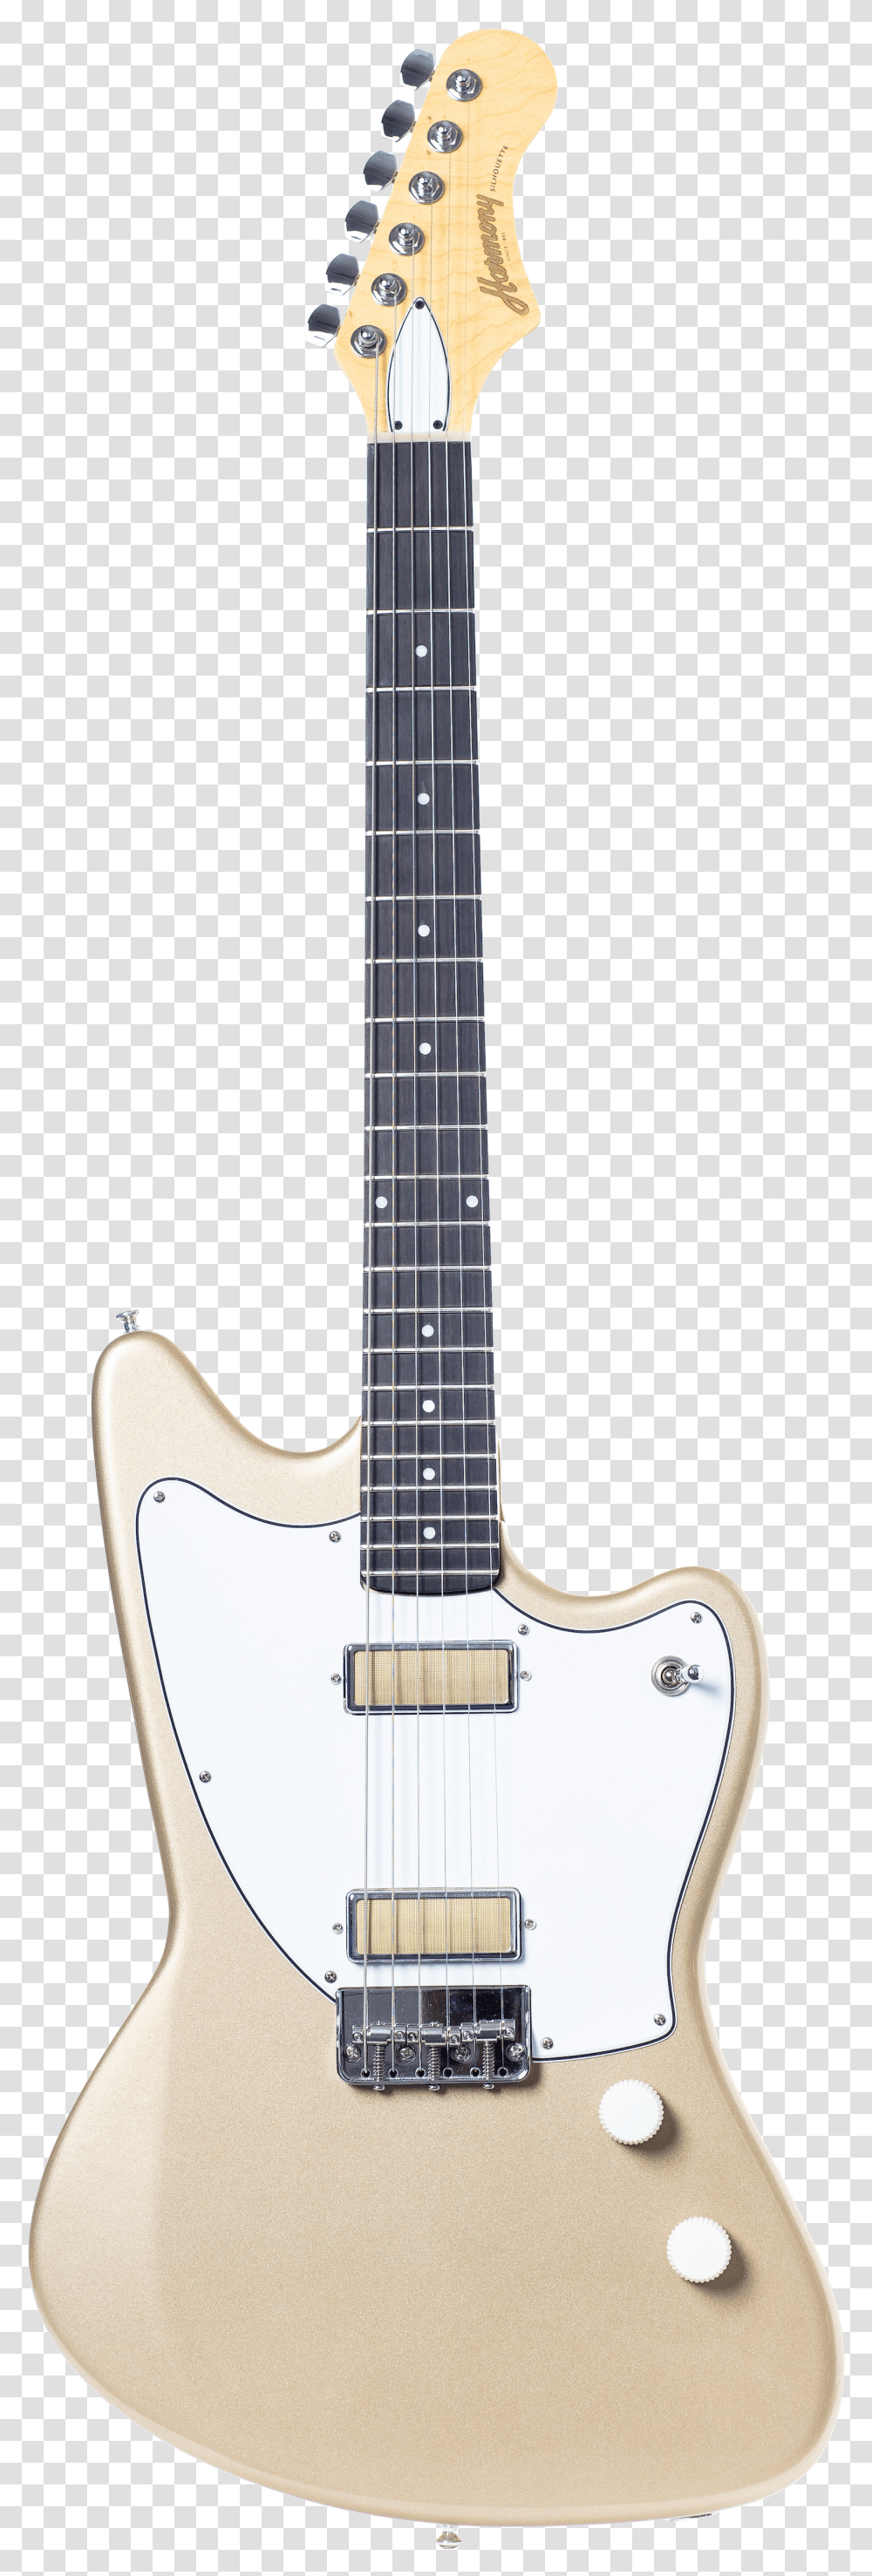 Standard Silhouette Electric Guitar Champagne Electric Guitar Transparent Png